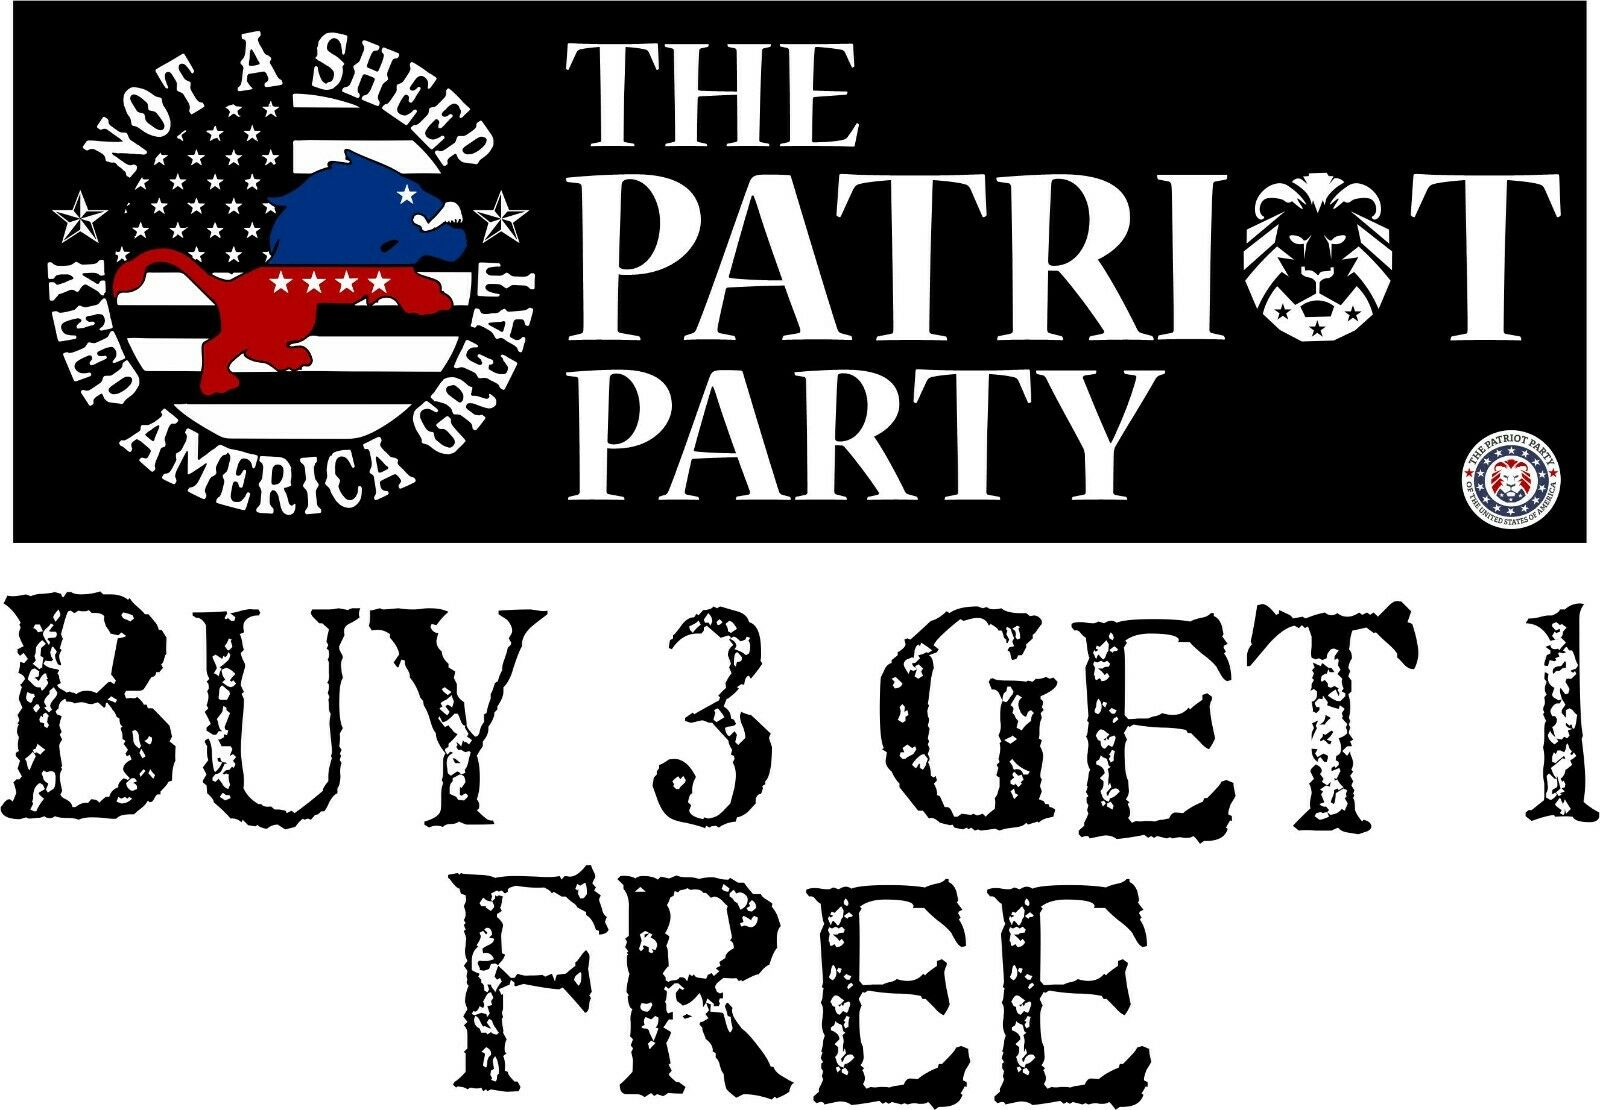 The Patriot Party Not a Sheep Bumper Sticker 8.6"x3" Patriot Party Donald Trump - Powercall Sirens LLC